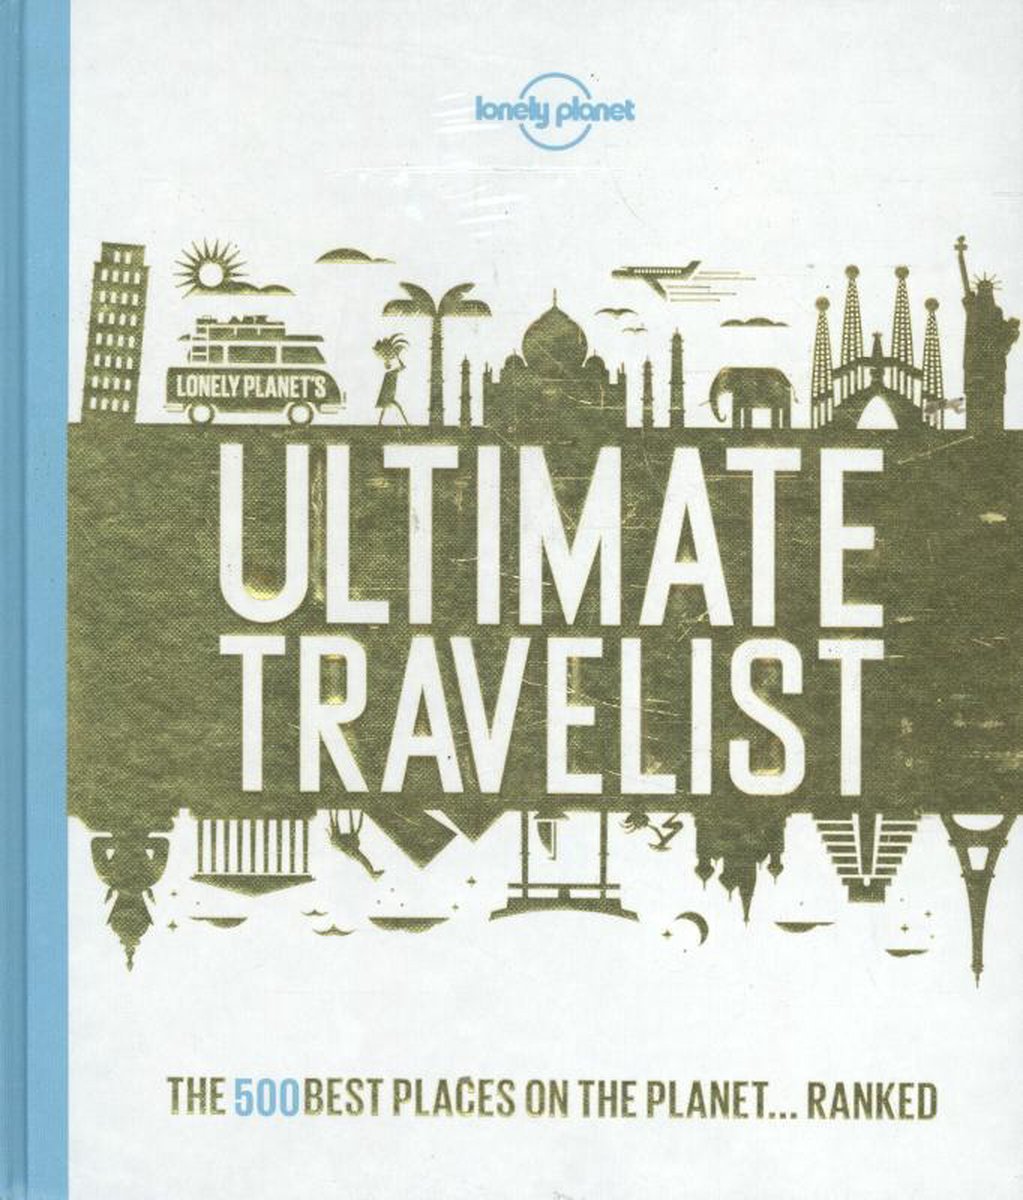 lonely planet travel anthology